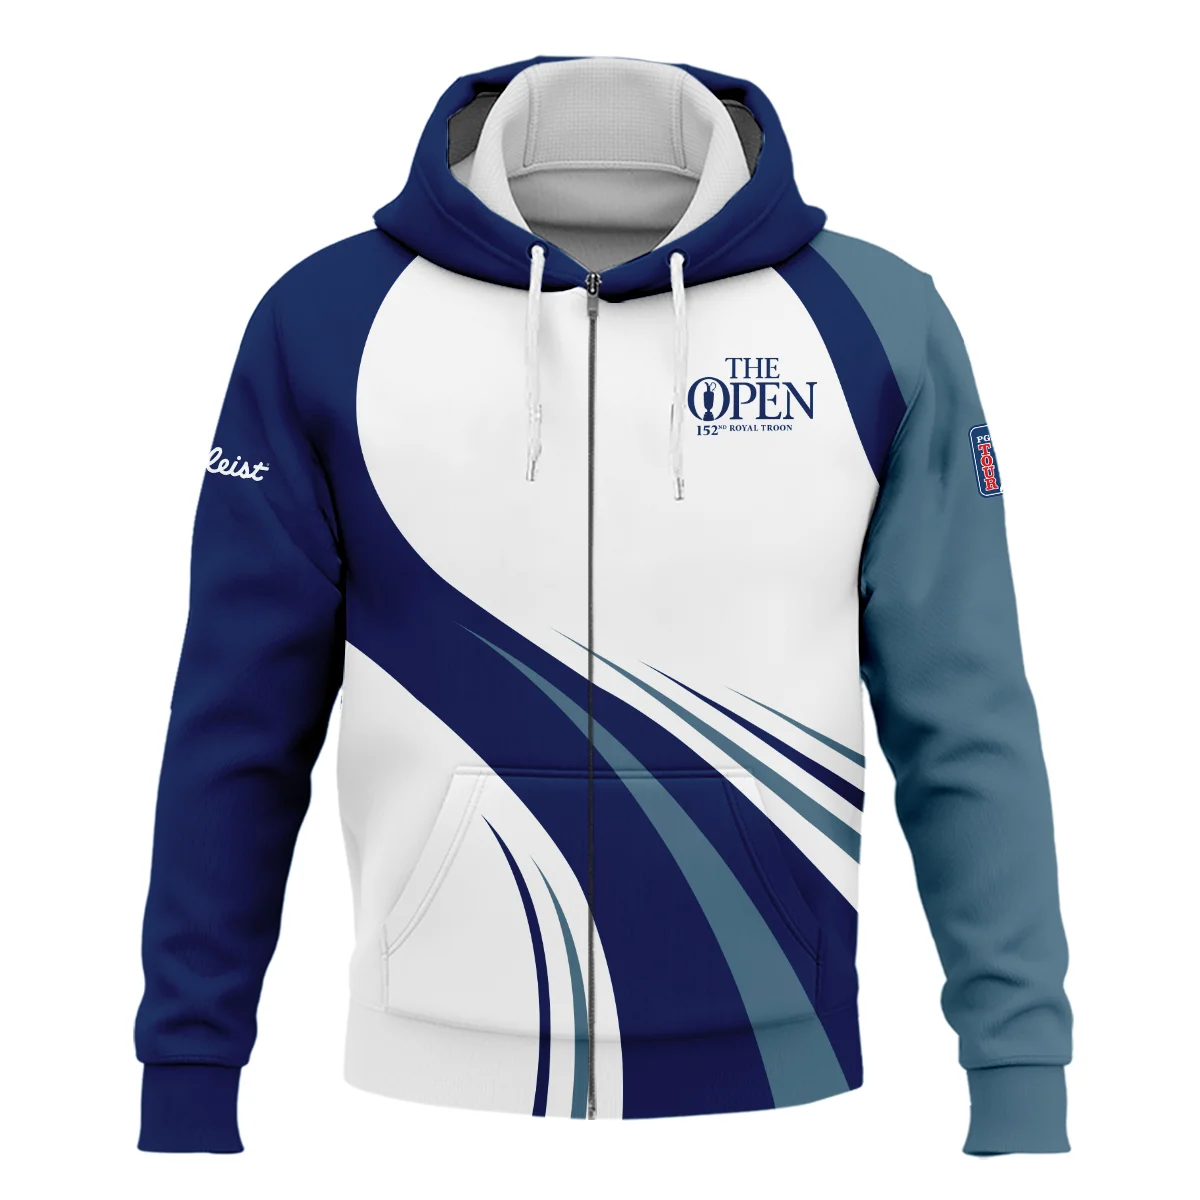 152nd Open Championship Titleist White Mostly Desaturated Dark Blue Zipper Hoodie Shirt All Over Prints HOTOP270624A02TLZHD